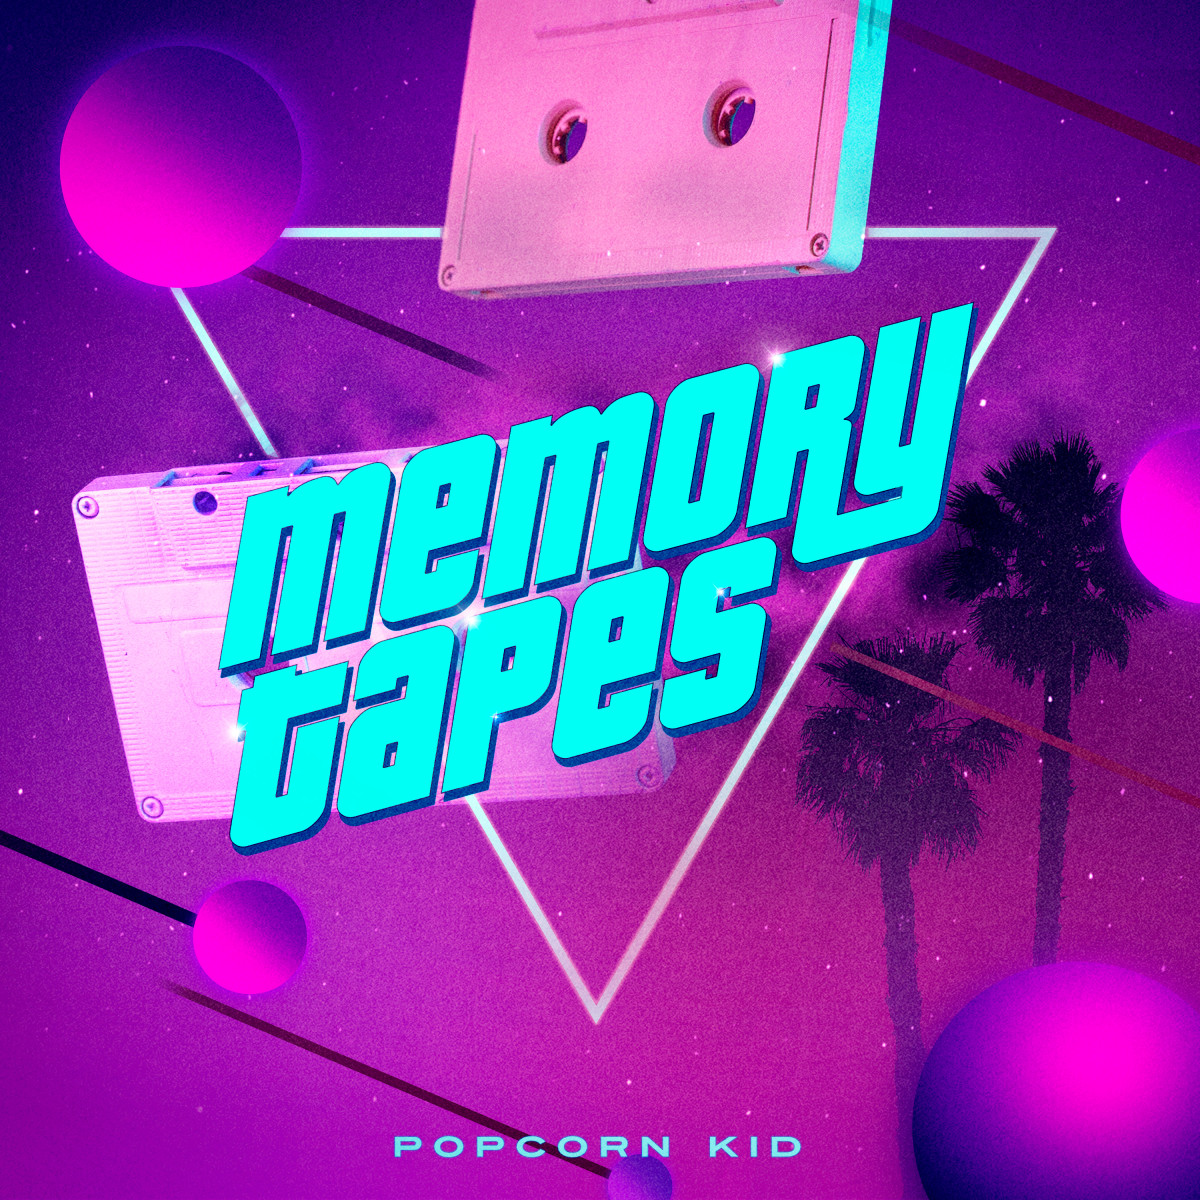 retrowave-album-review-memory-tapes-by-popcorn-kid